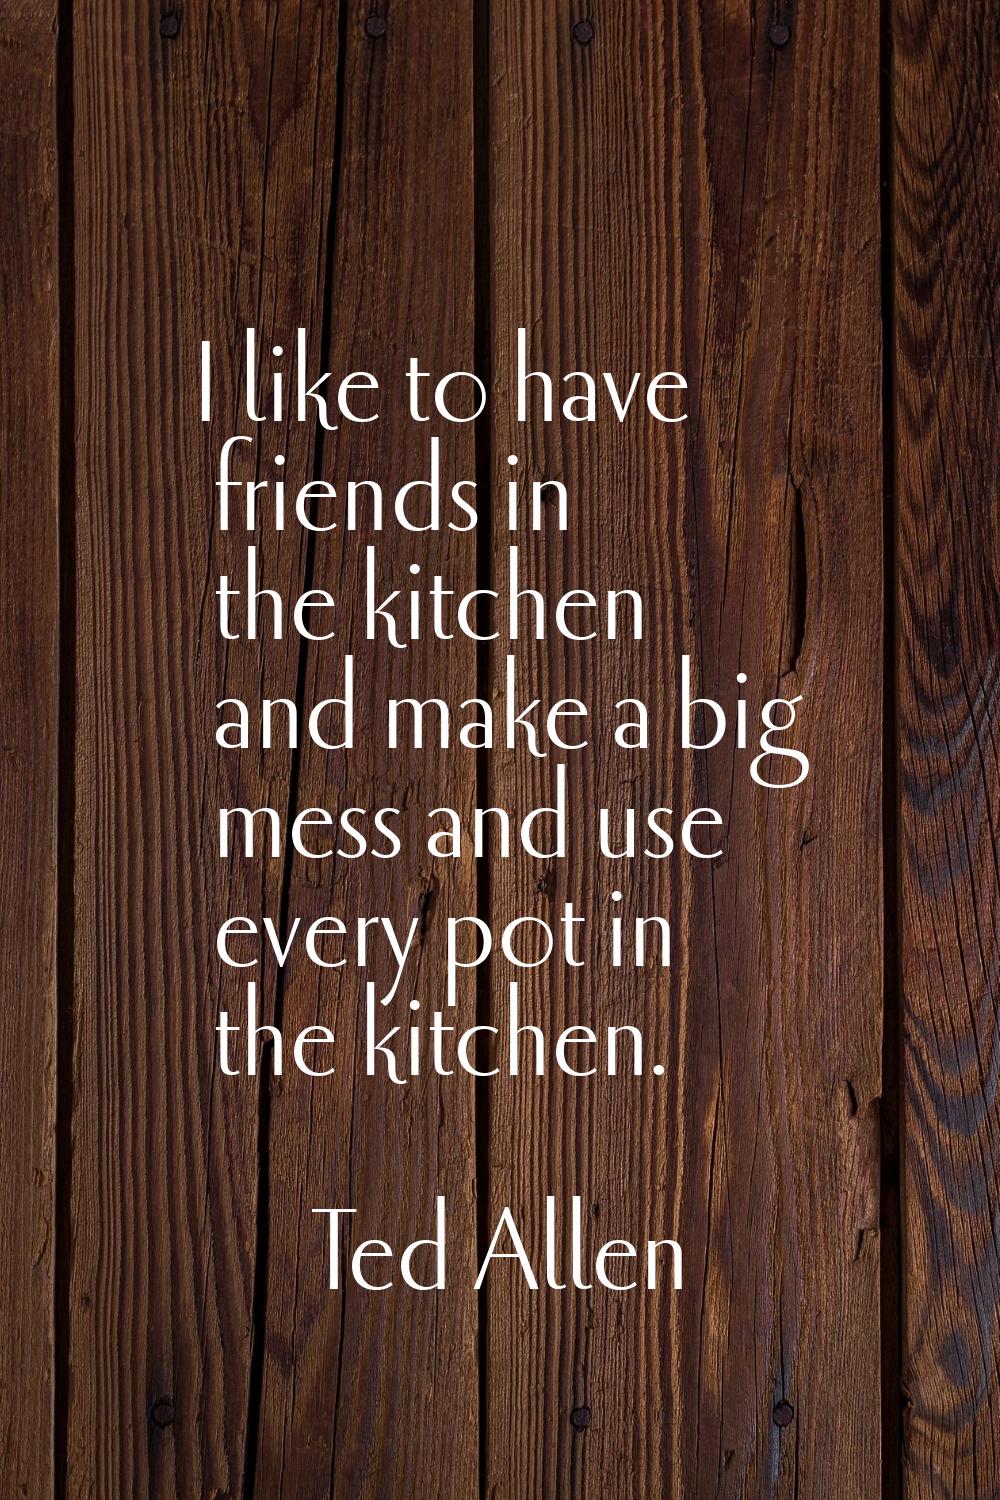 I like to have friends in the kitchen and make a big mess and use every pot in the kitchen.